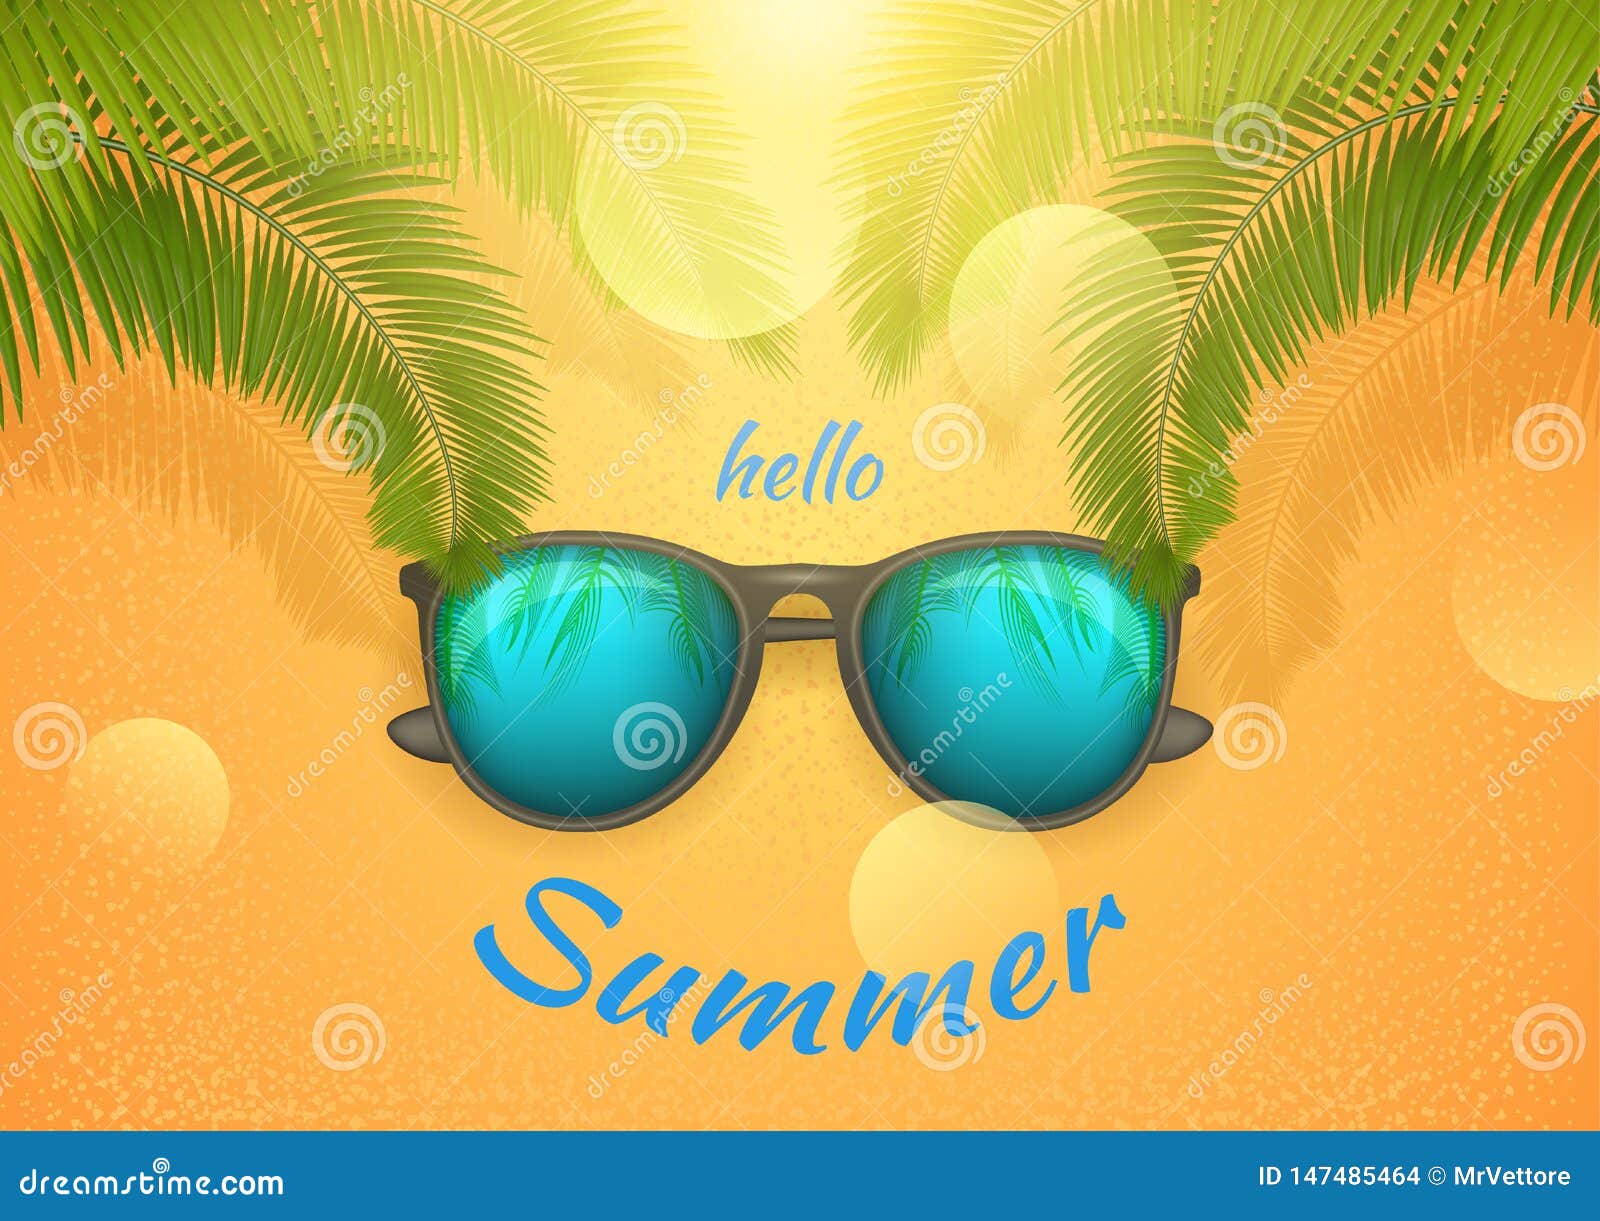 summer banner with text hello summer, sunglass and palm branch happy bright concept in yellow background.  stock